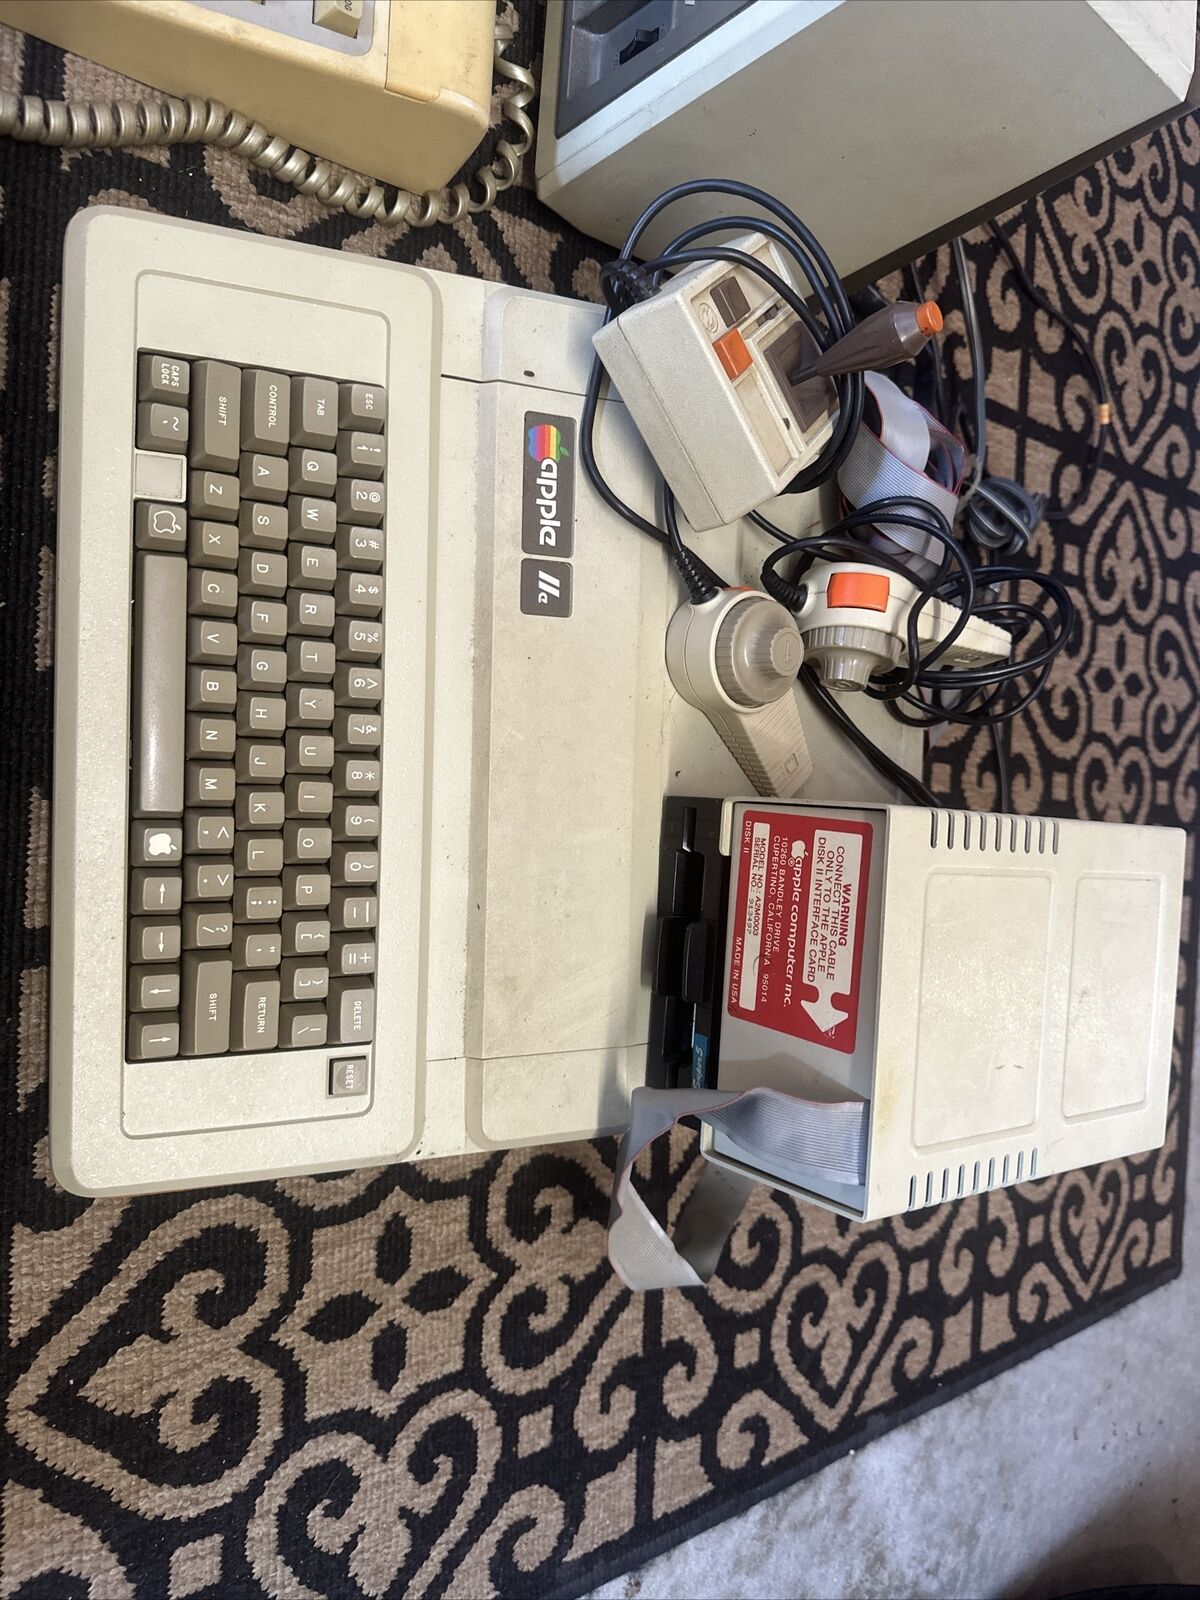 Vintage Apple IIe (2e) Computer with Monitor, Two Disc Drives, Joystick